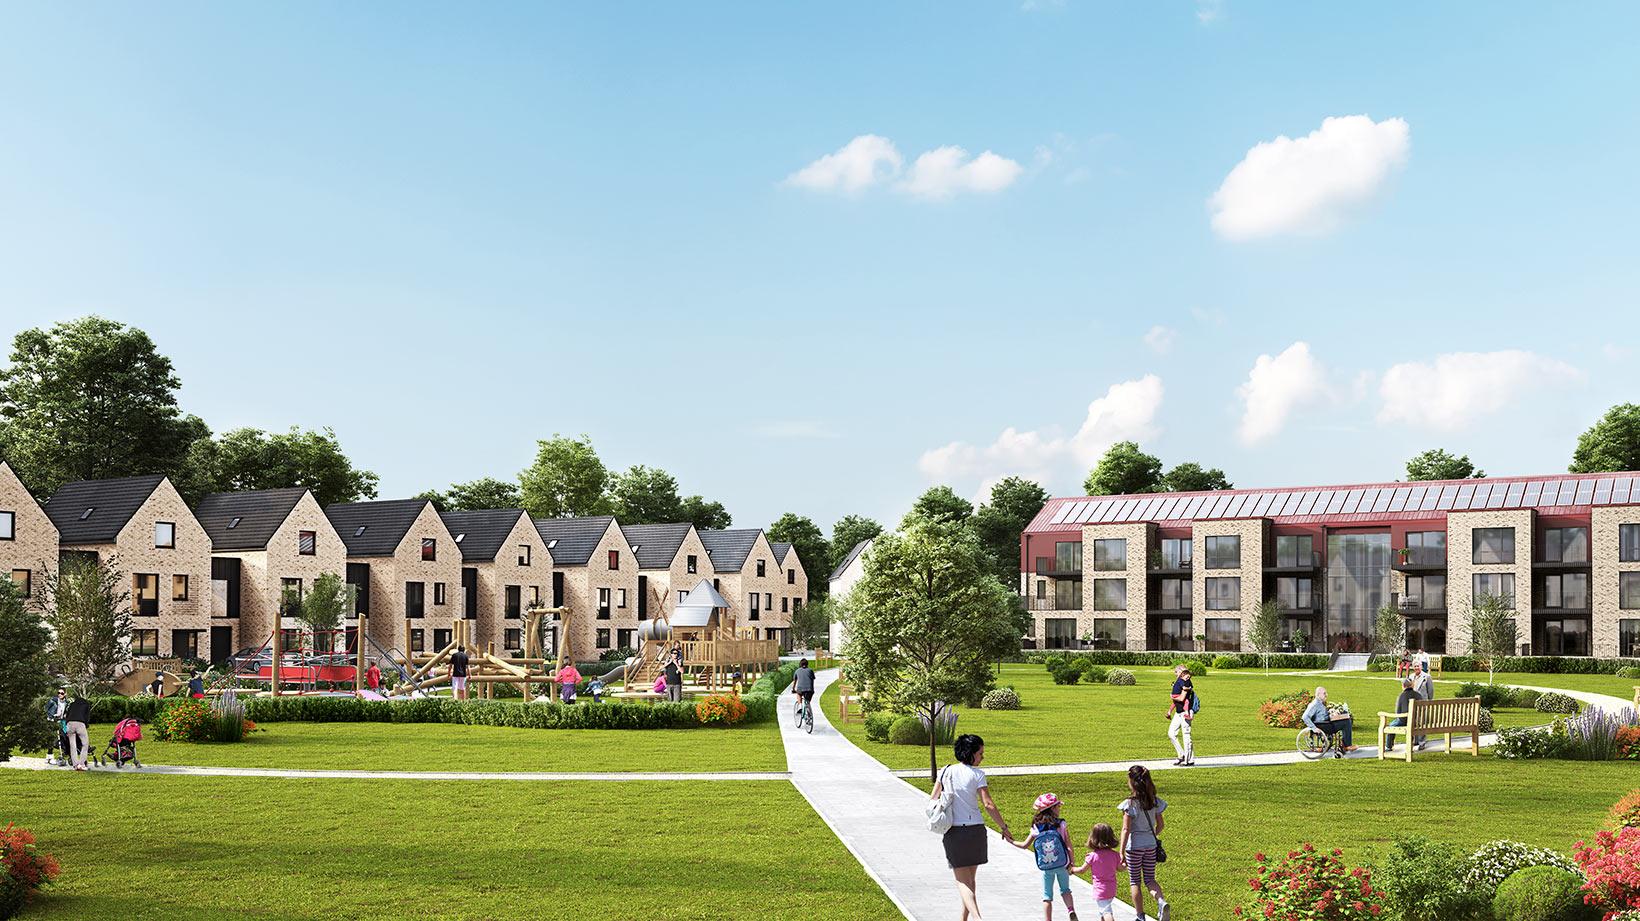 An image showing a rendering of the new Shape Homes York development